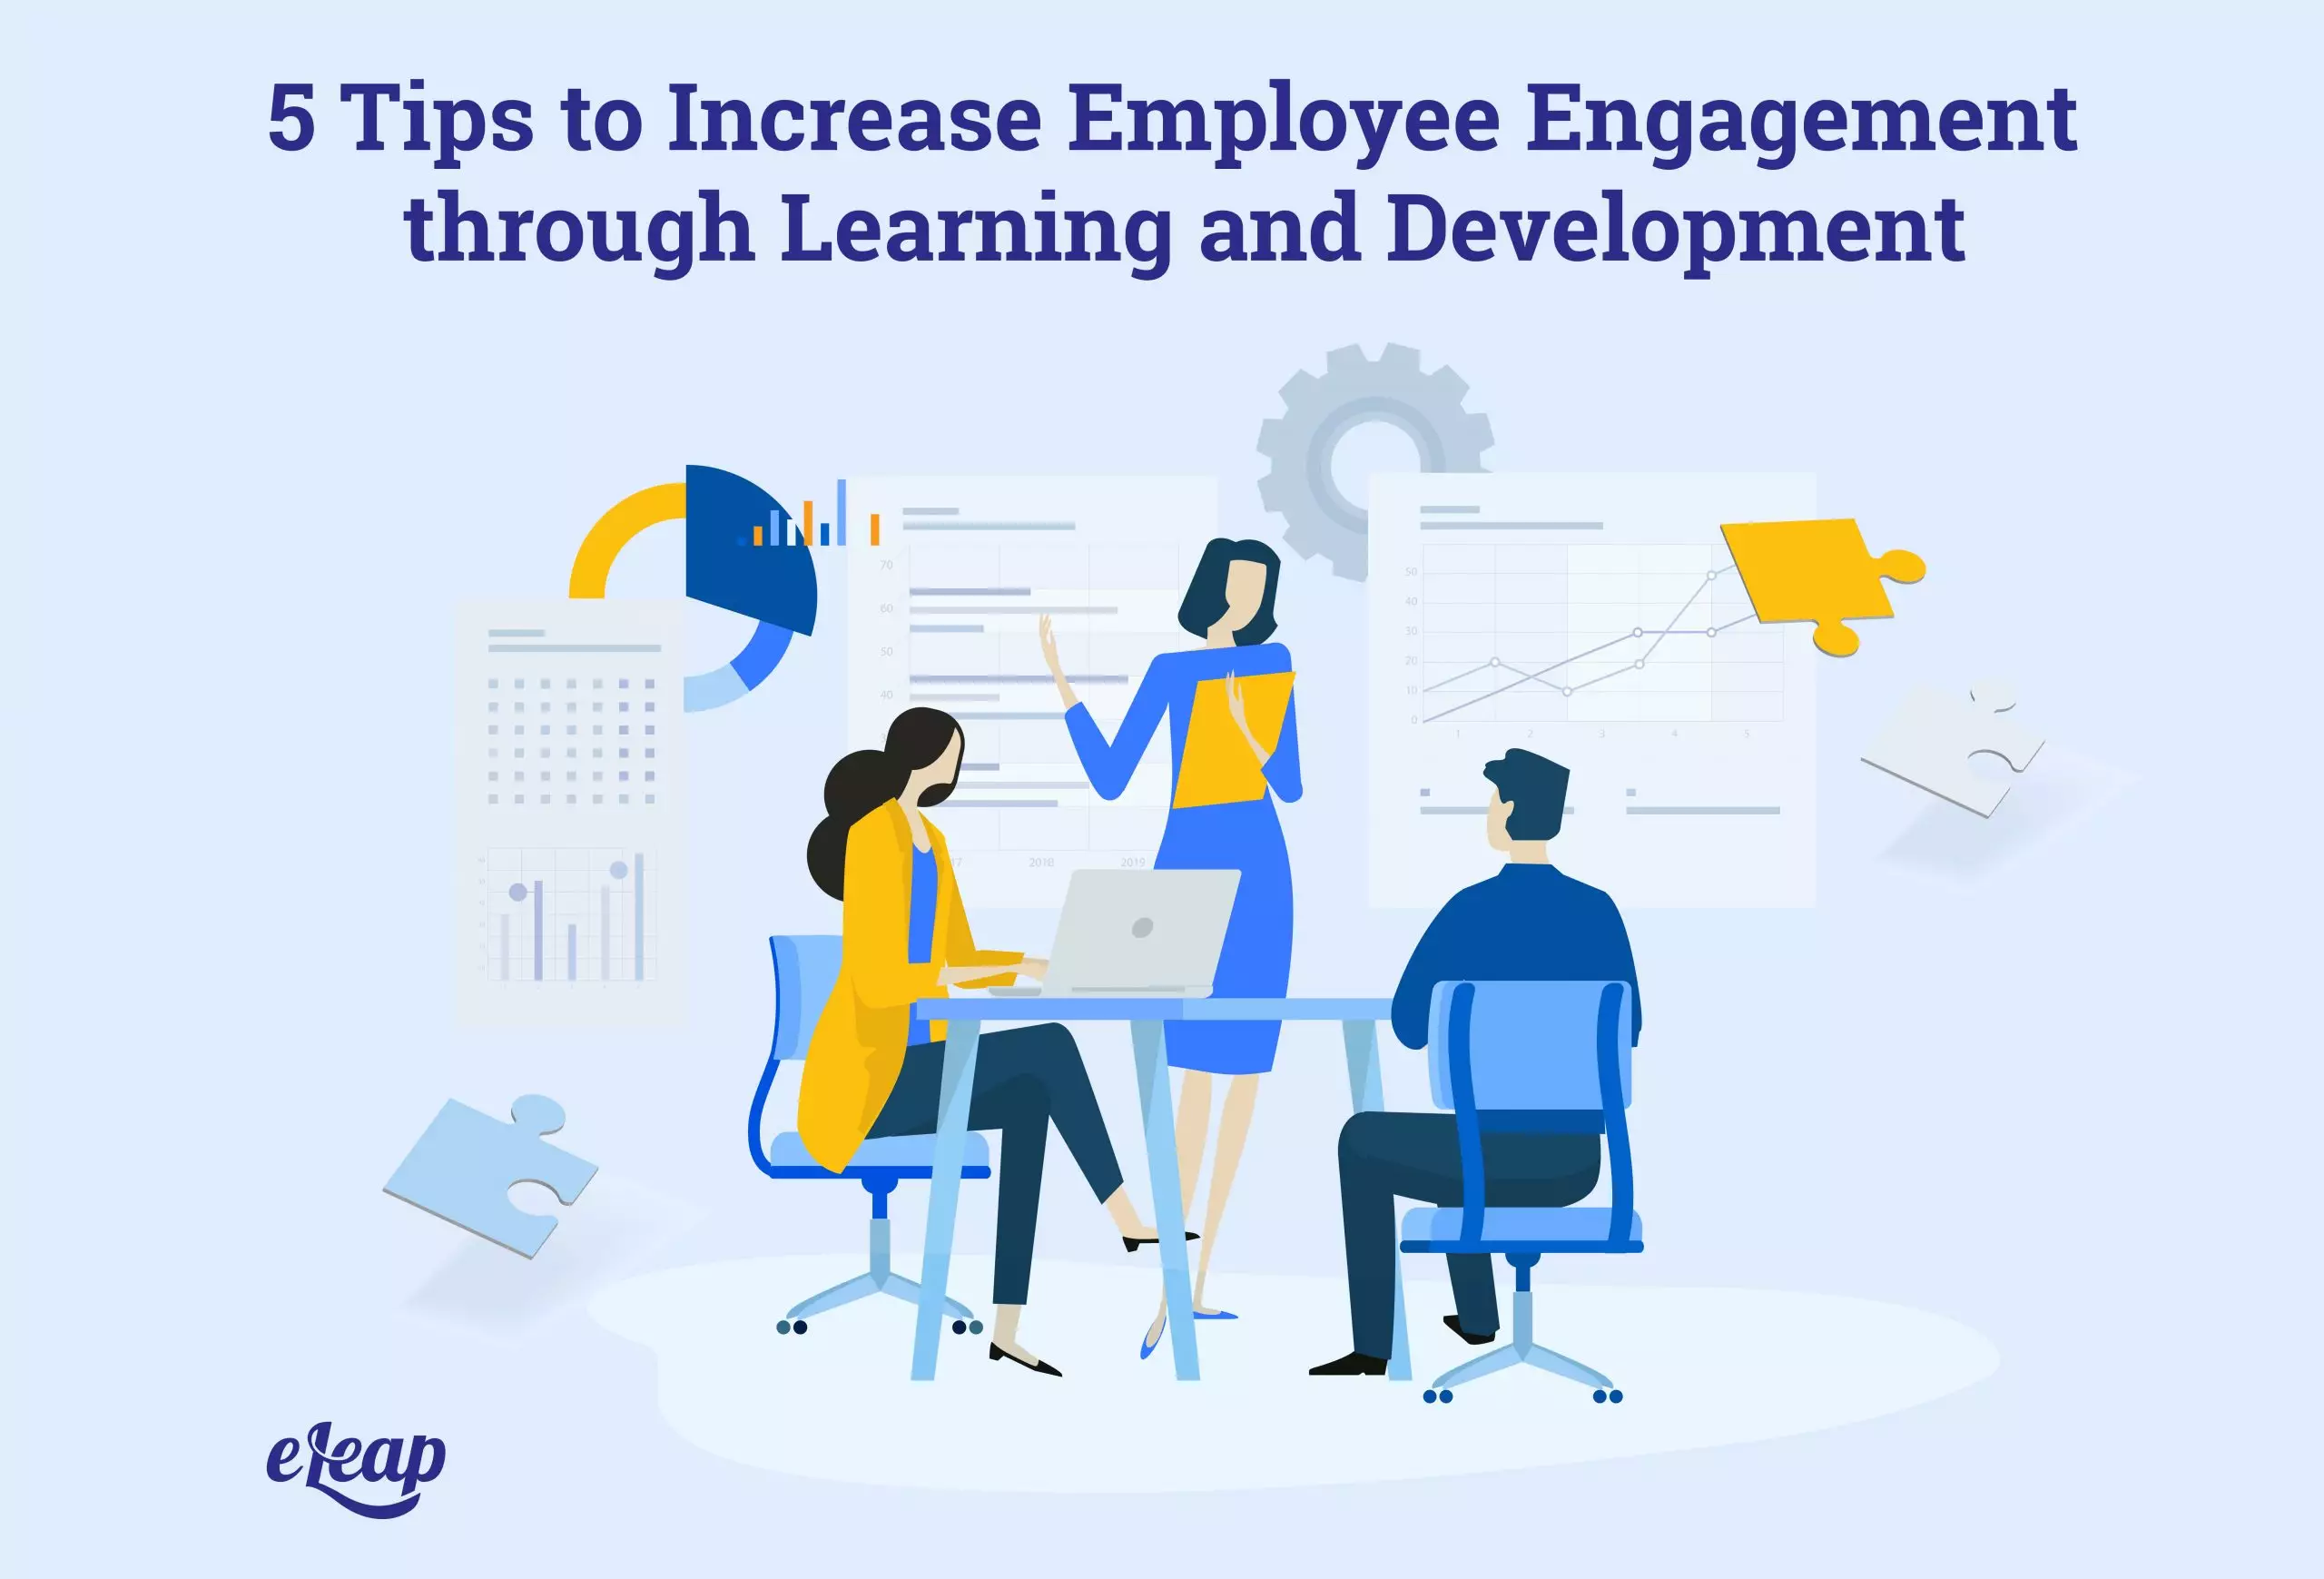 5 Tips to Increase Employee Engagement through Learning and Development